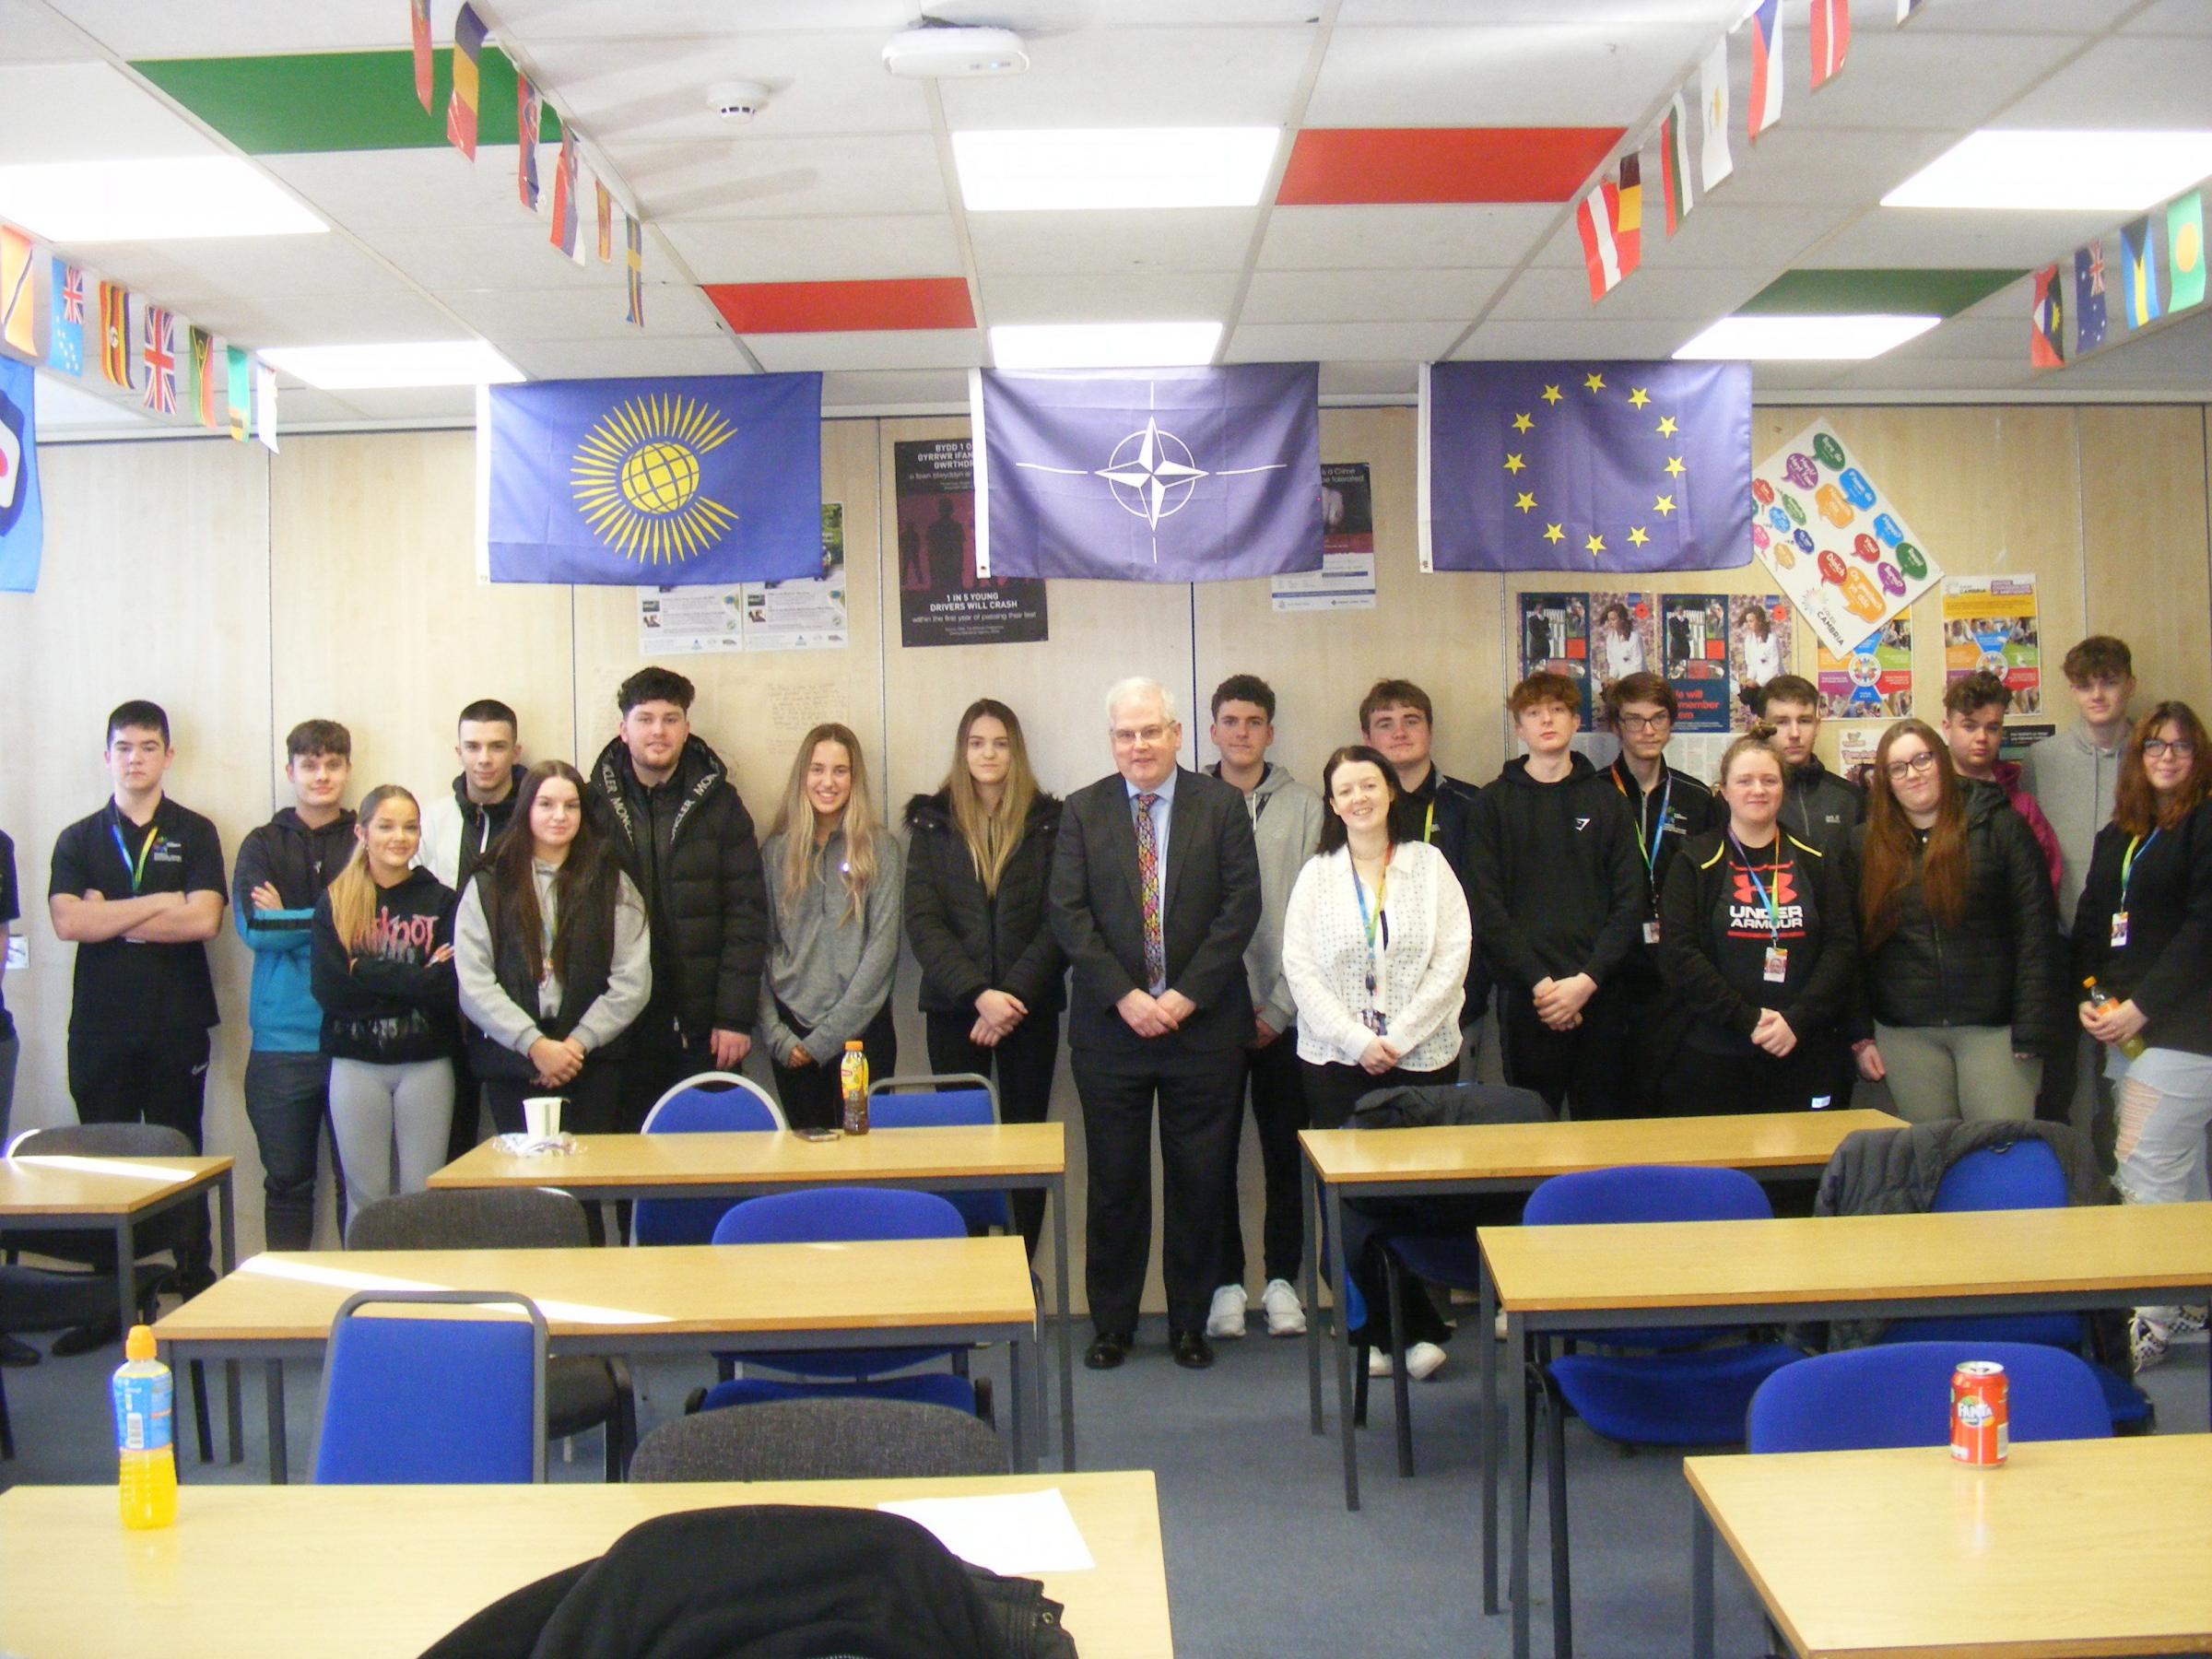 Mark Tami MP, with students on the Uniformed Protective Services course at Coleg Cambria, Connah’s Quay.